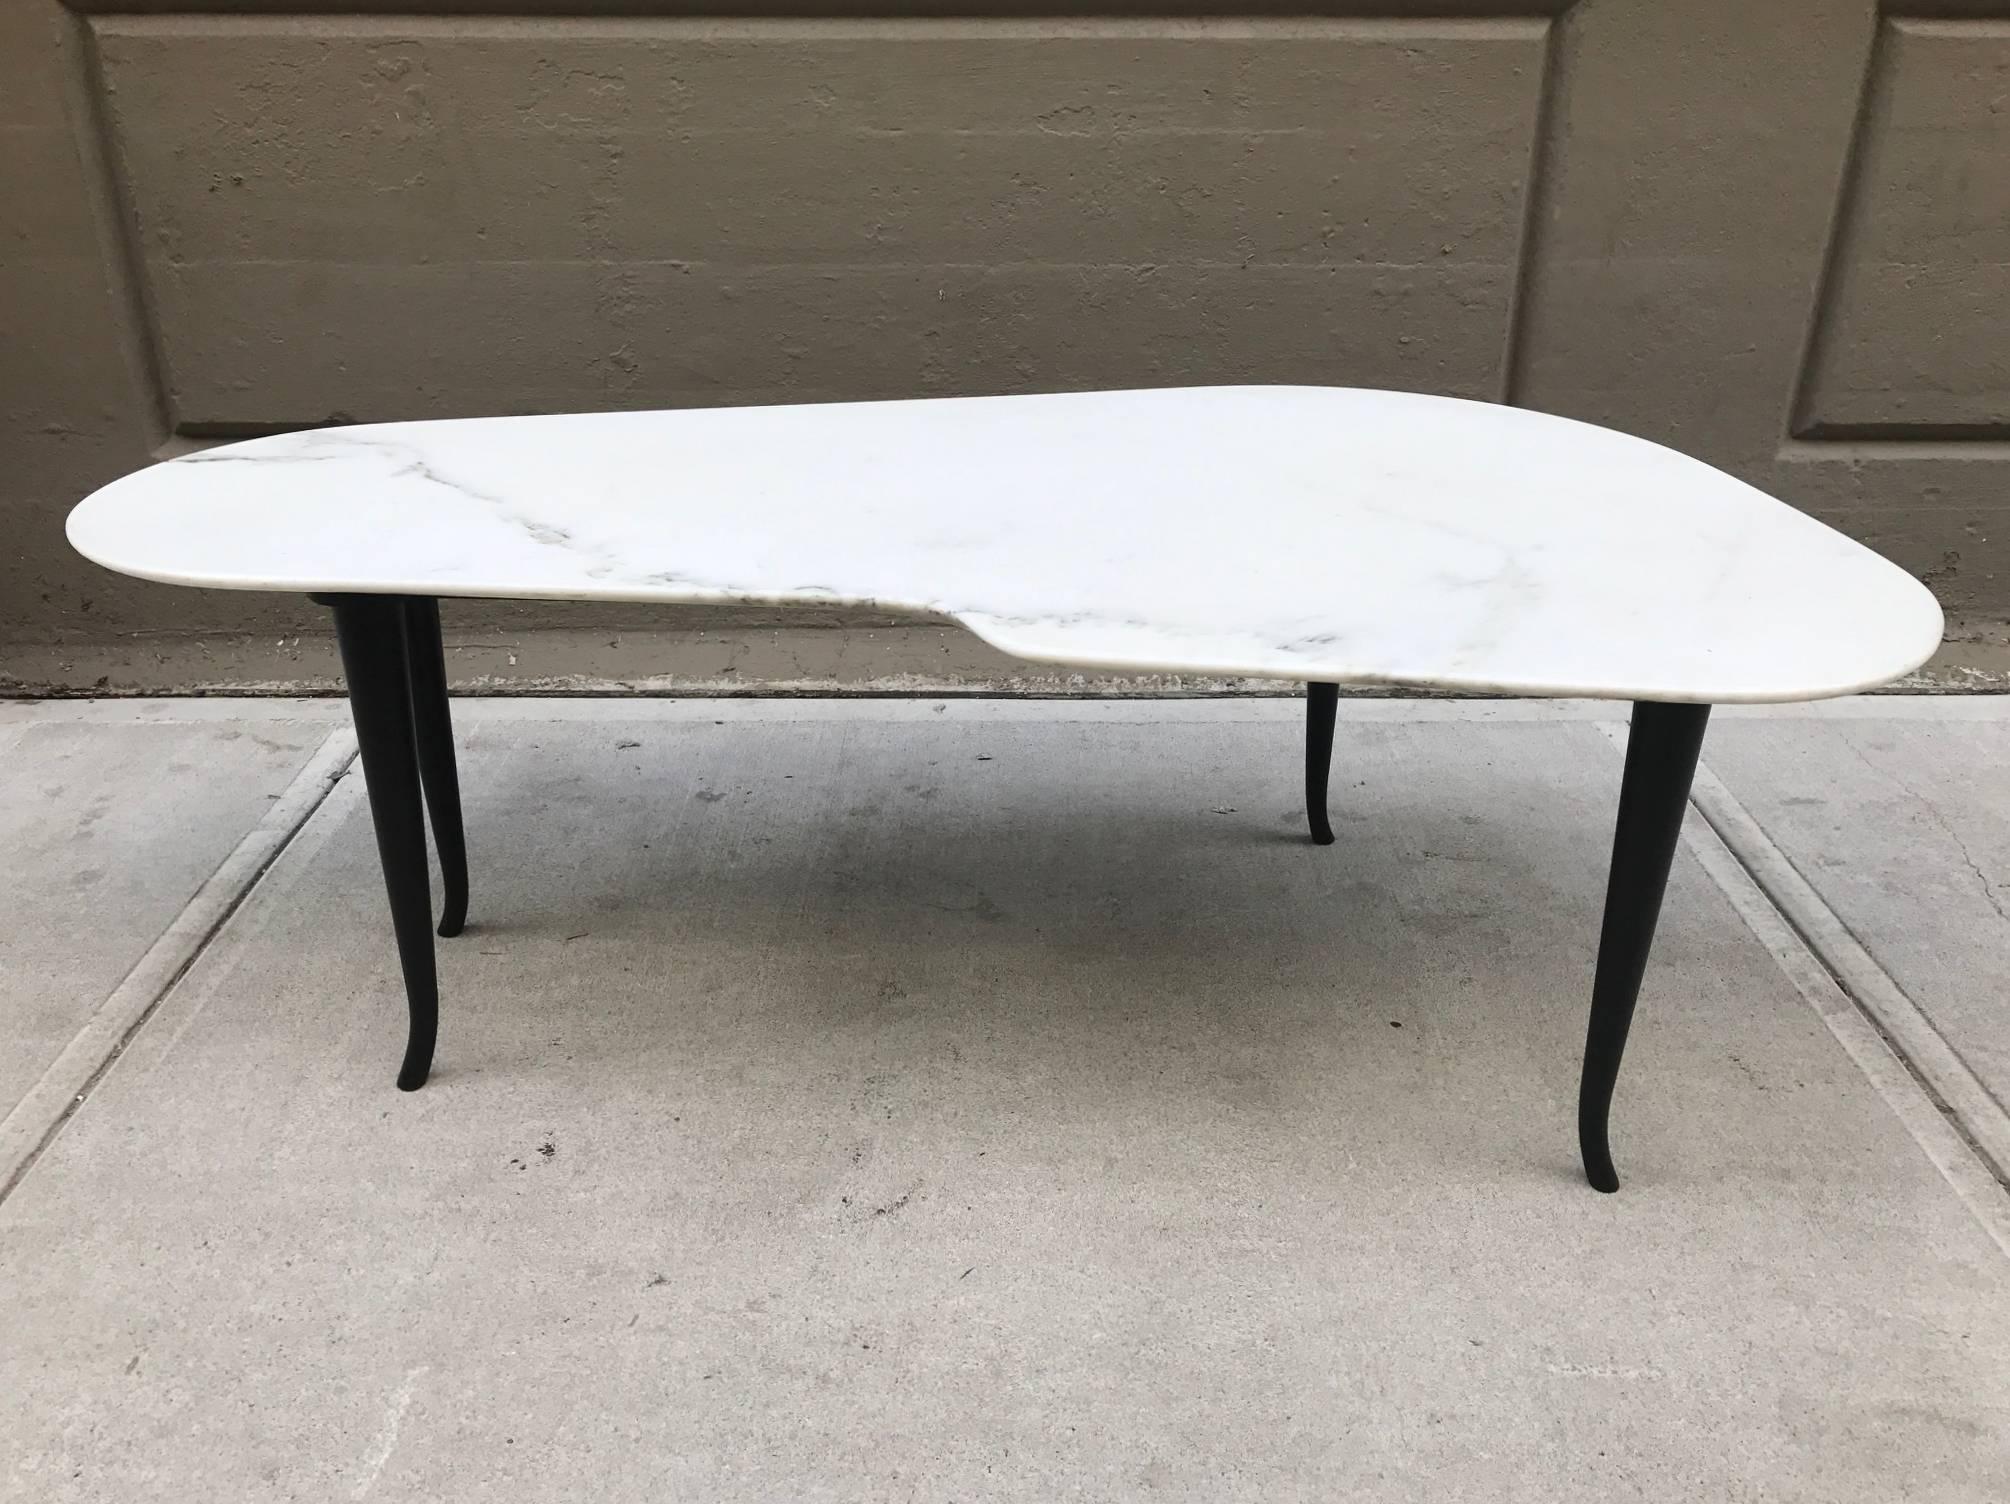 Marble-top coffee table in the style of T.H. Robsjohn-Gibbings. Has a sculptural Italian marble top with a black lacquered base.